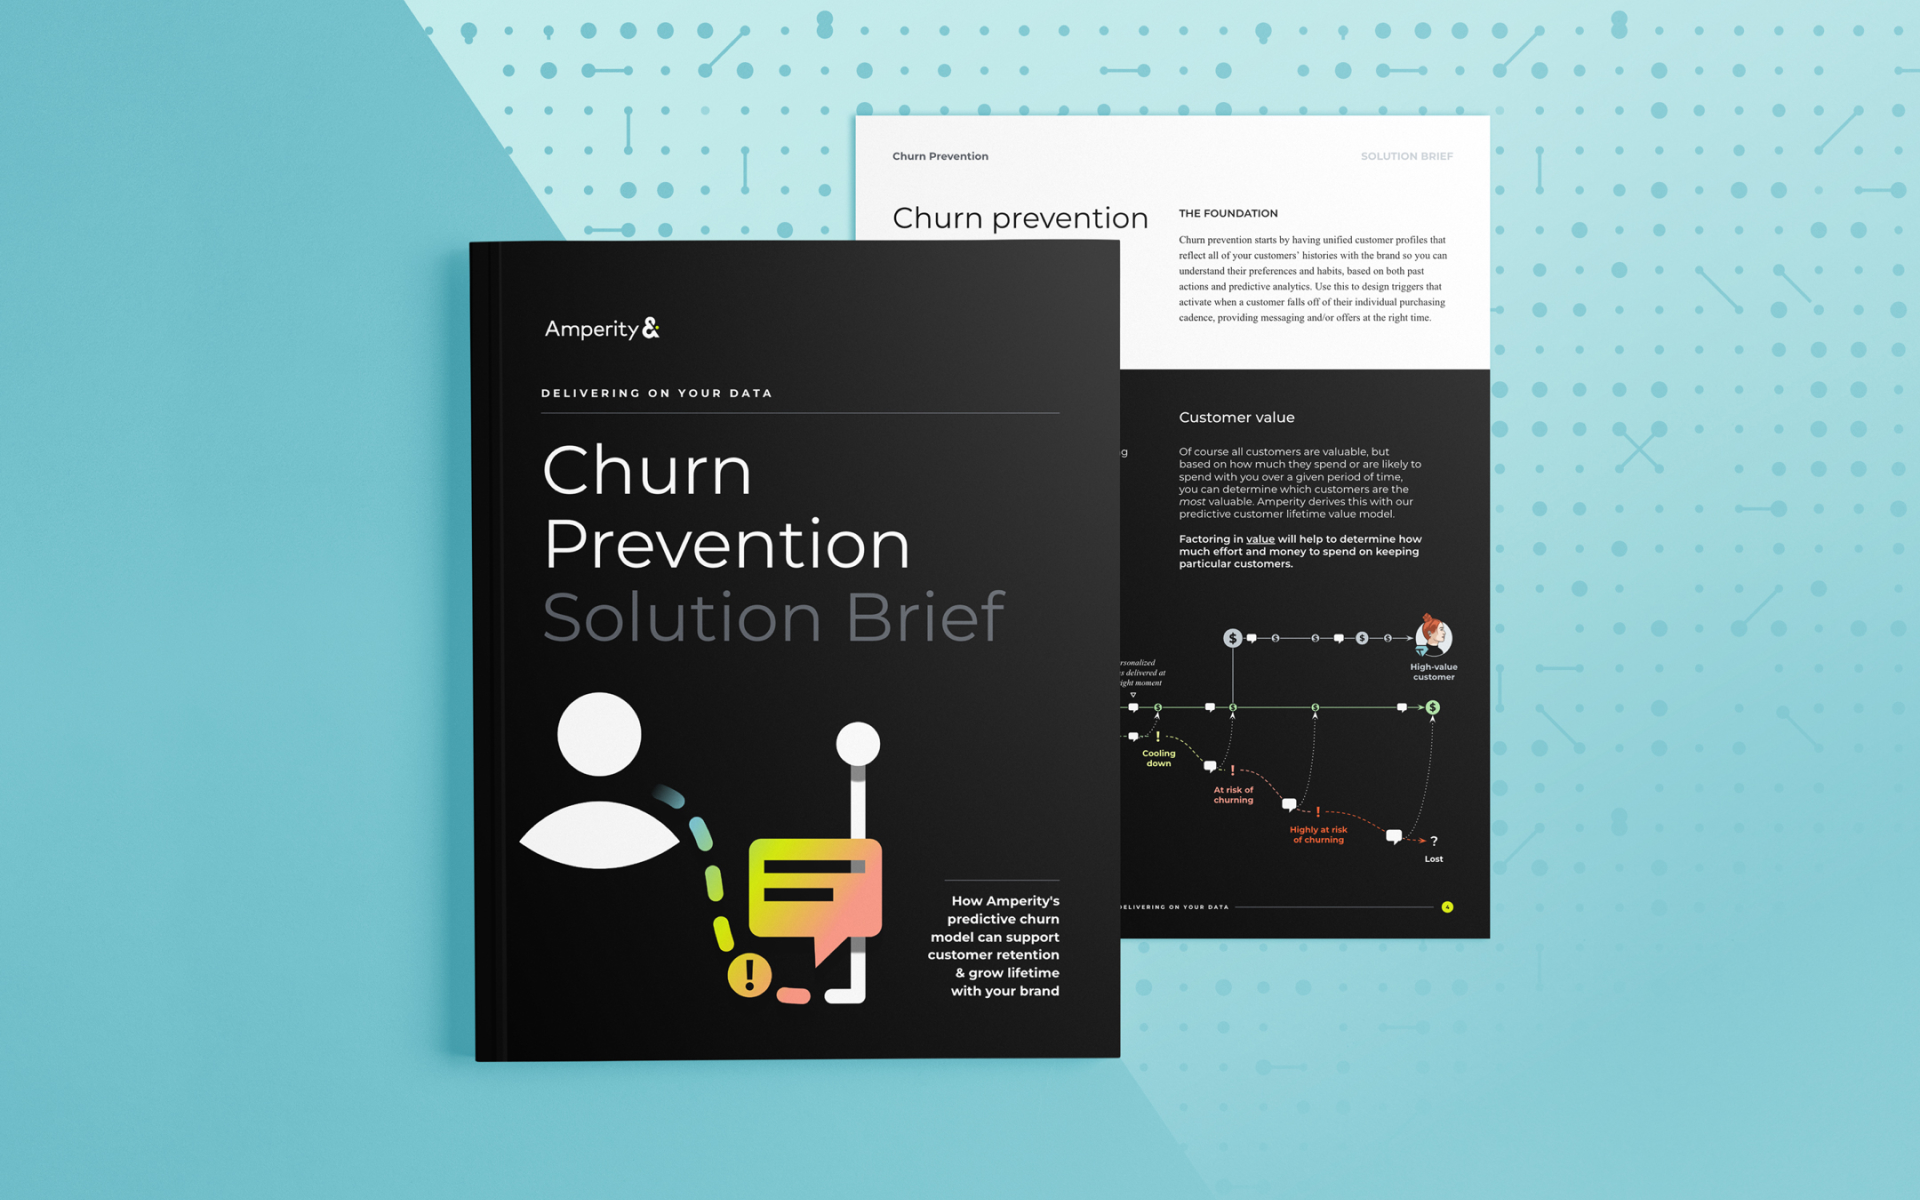 Preview image of the churn prevention solution brief